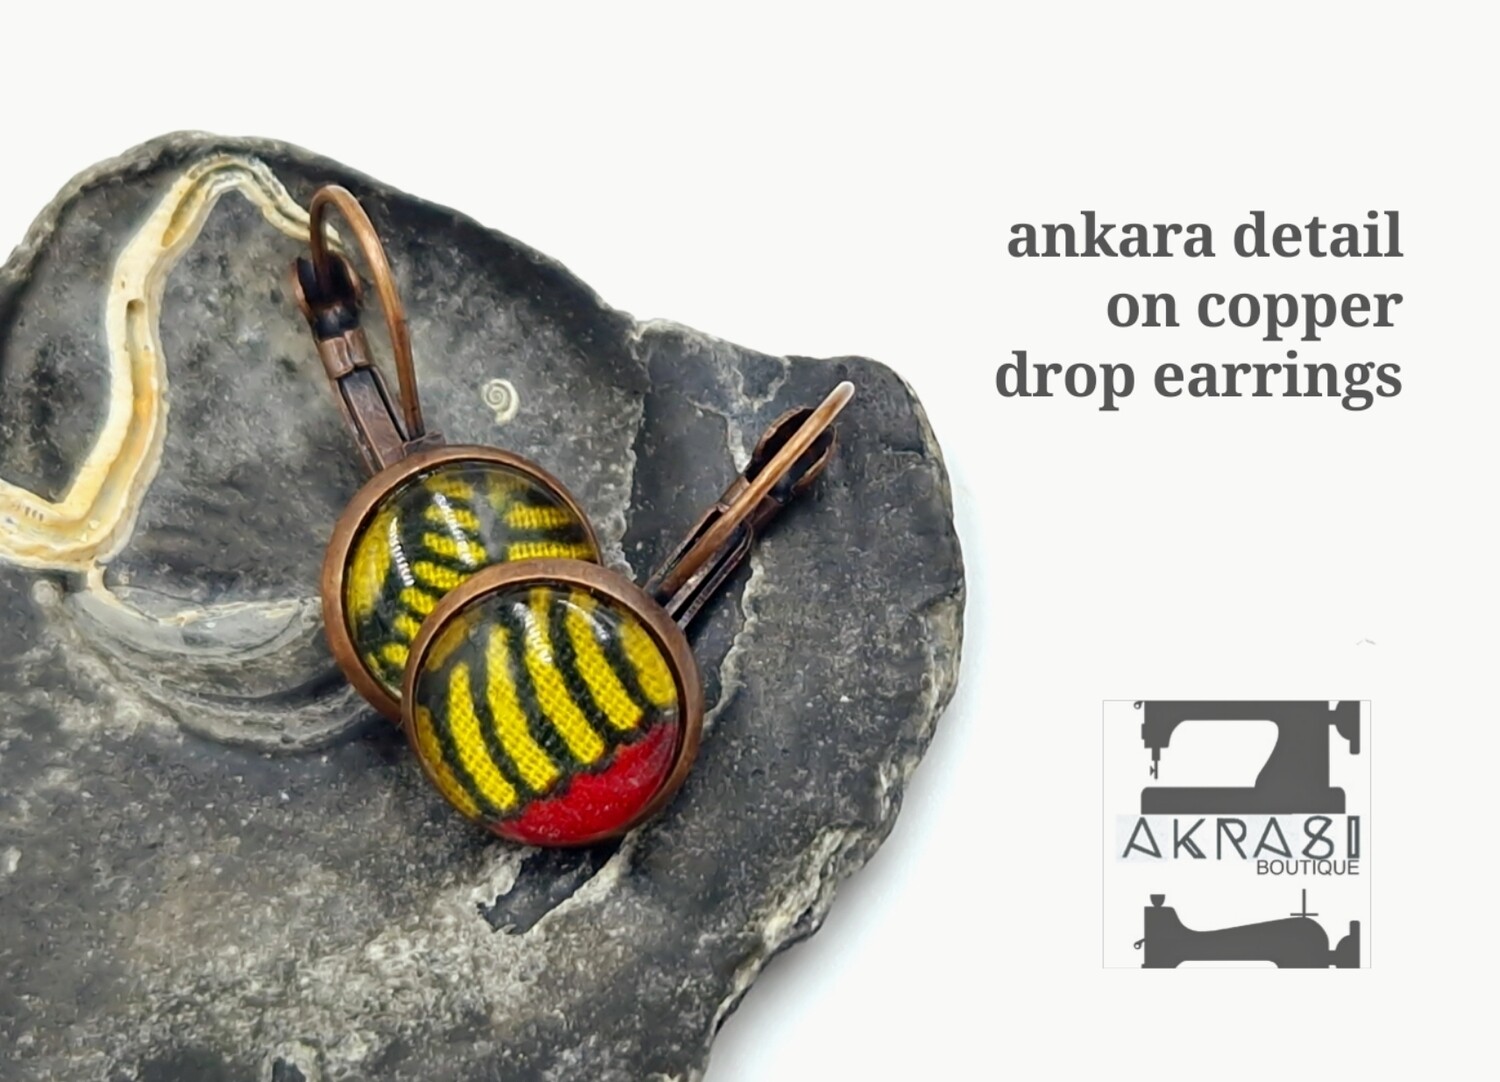 Red and yellow ankara on round copper drop earrings